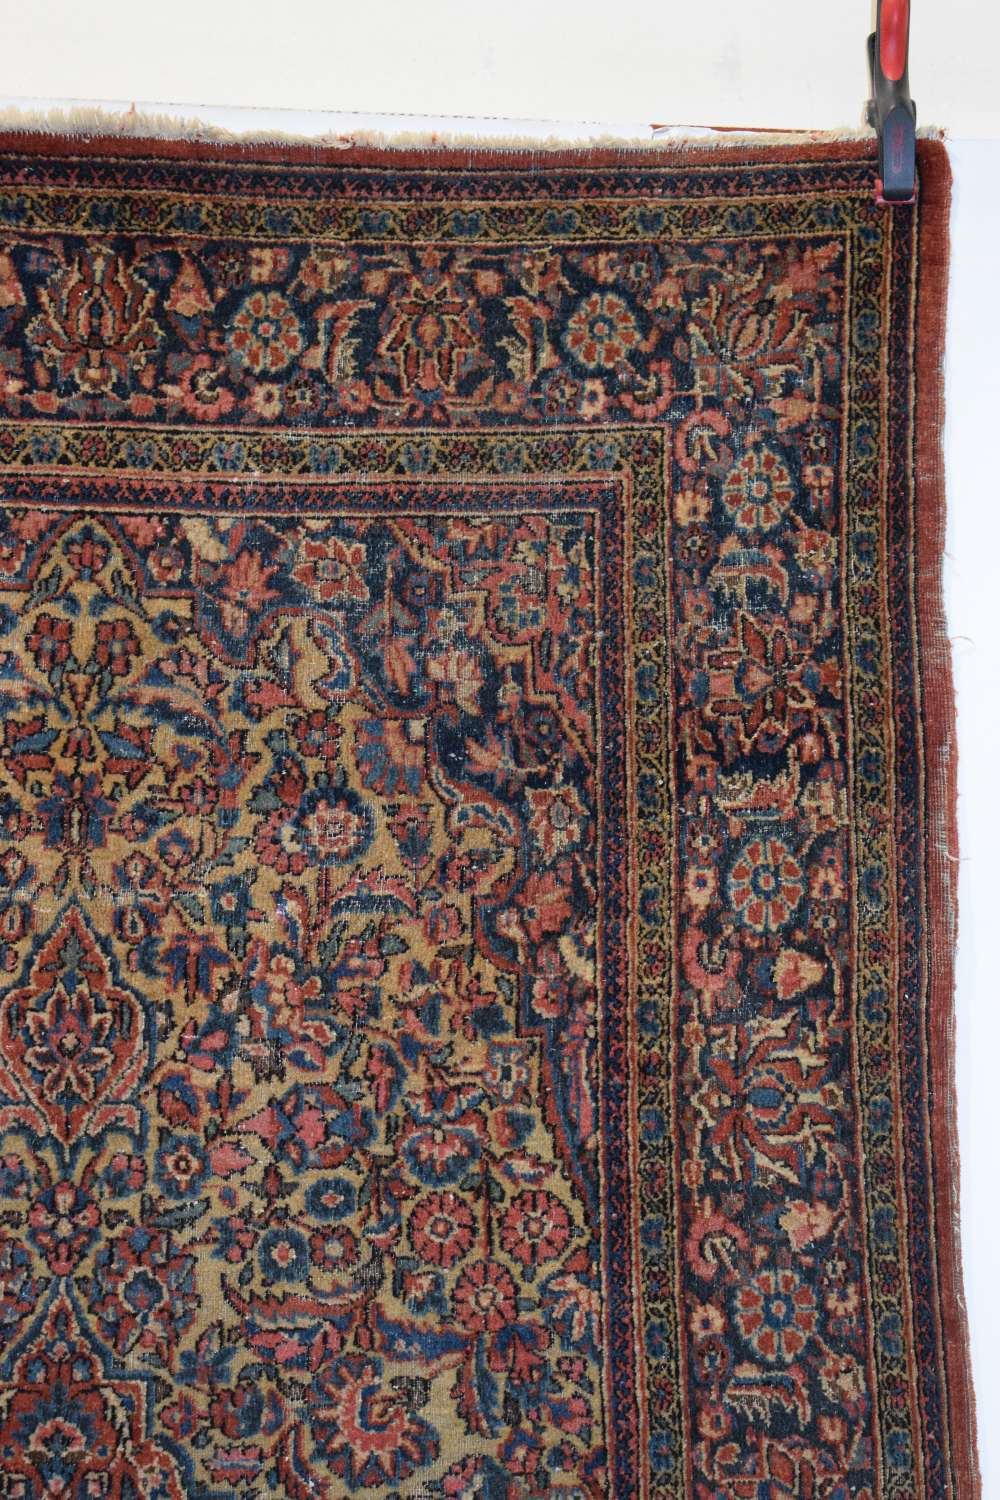 Kashan rug, west Persia, circa 1920s, 7ft. x 4ft. 2in. 2.13m. x 1.27m. Overall wear with some - Image 3 of 9